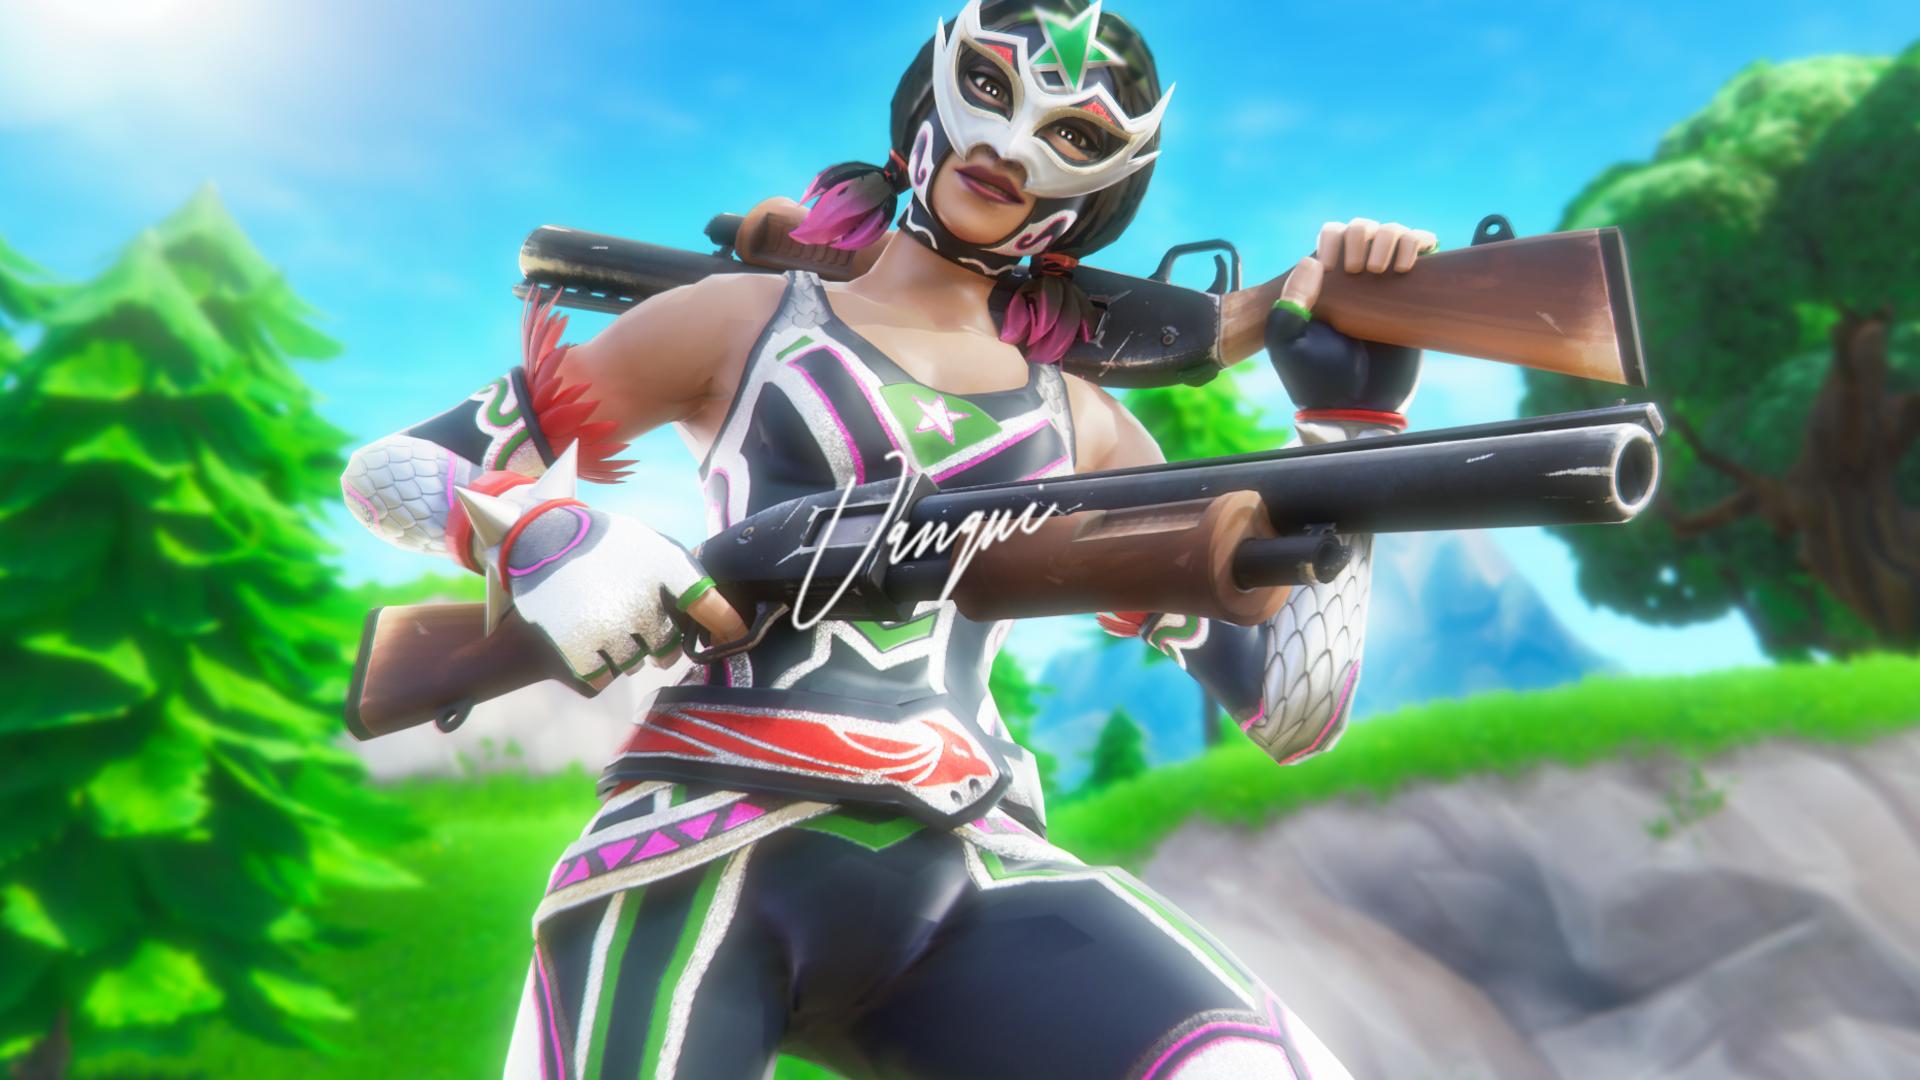 Tryhard Fortnite Sweaty Skins Wallpaper - Item shop available skins ...